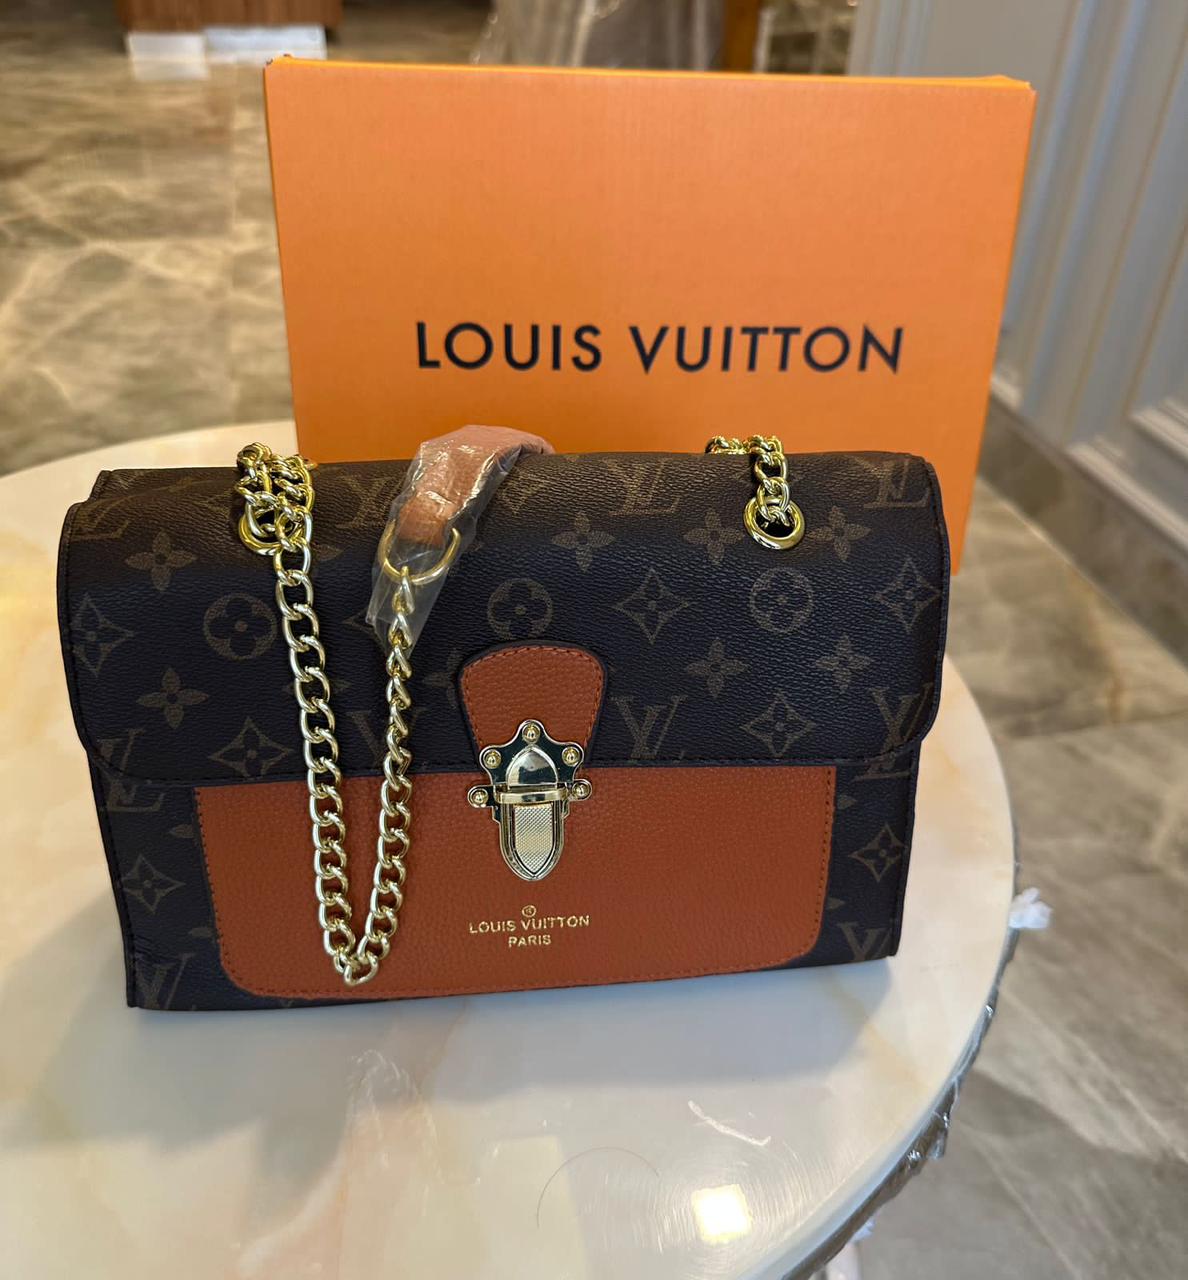 8 Classic Louis Vuitton Bags and Their Prices ...